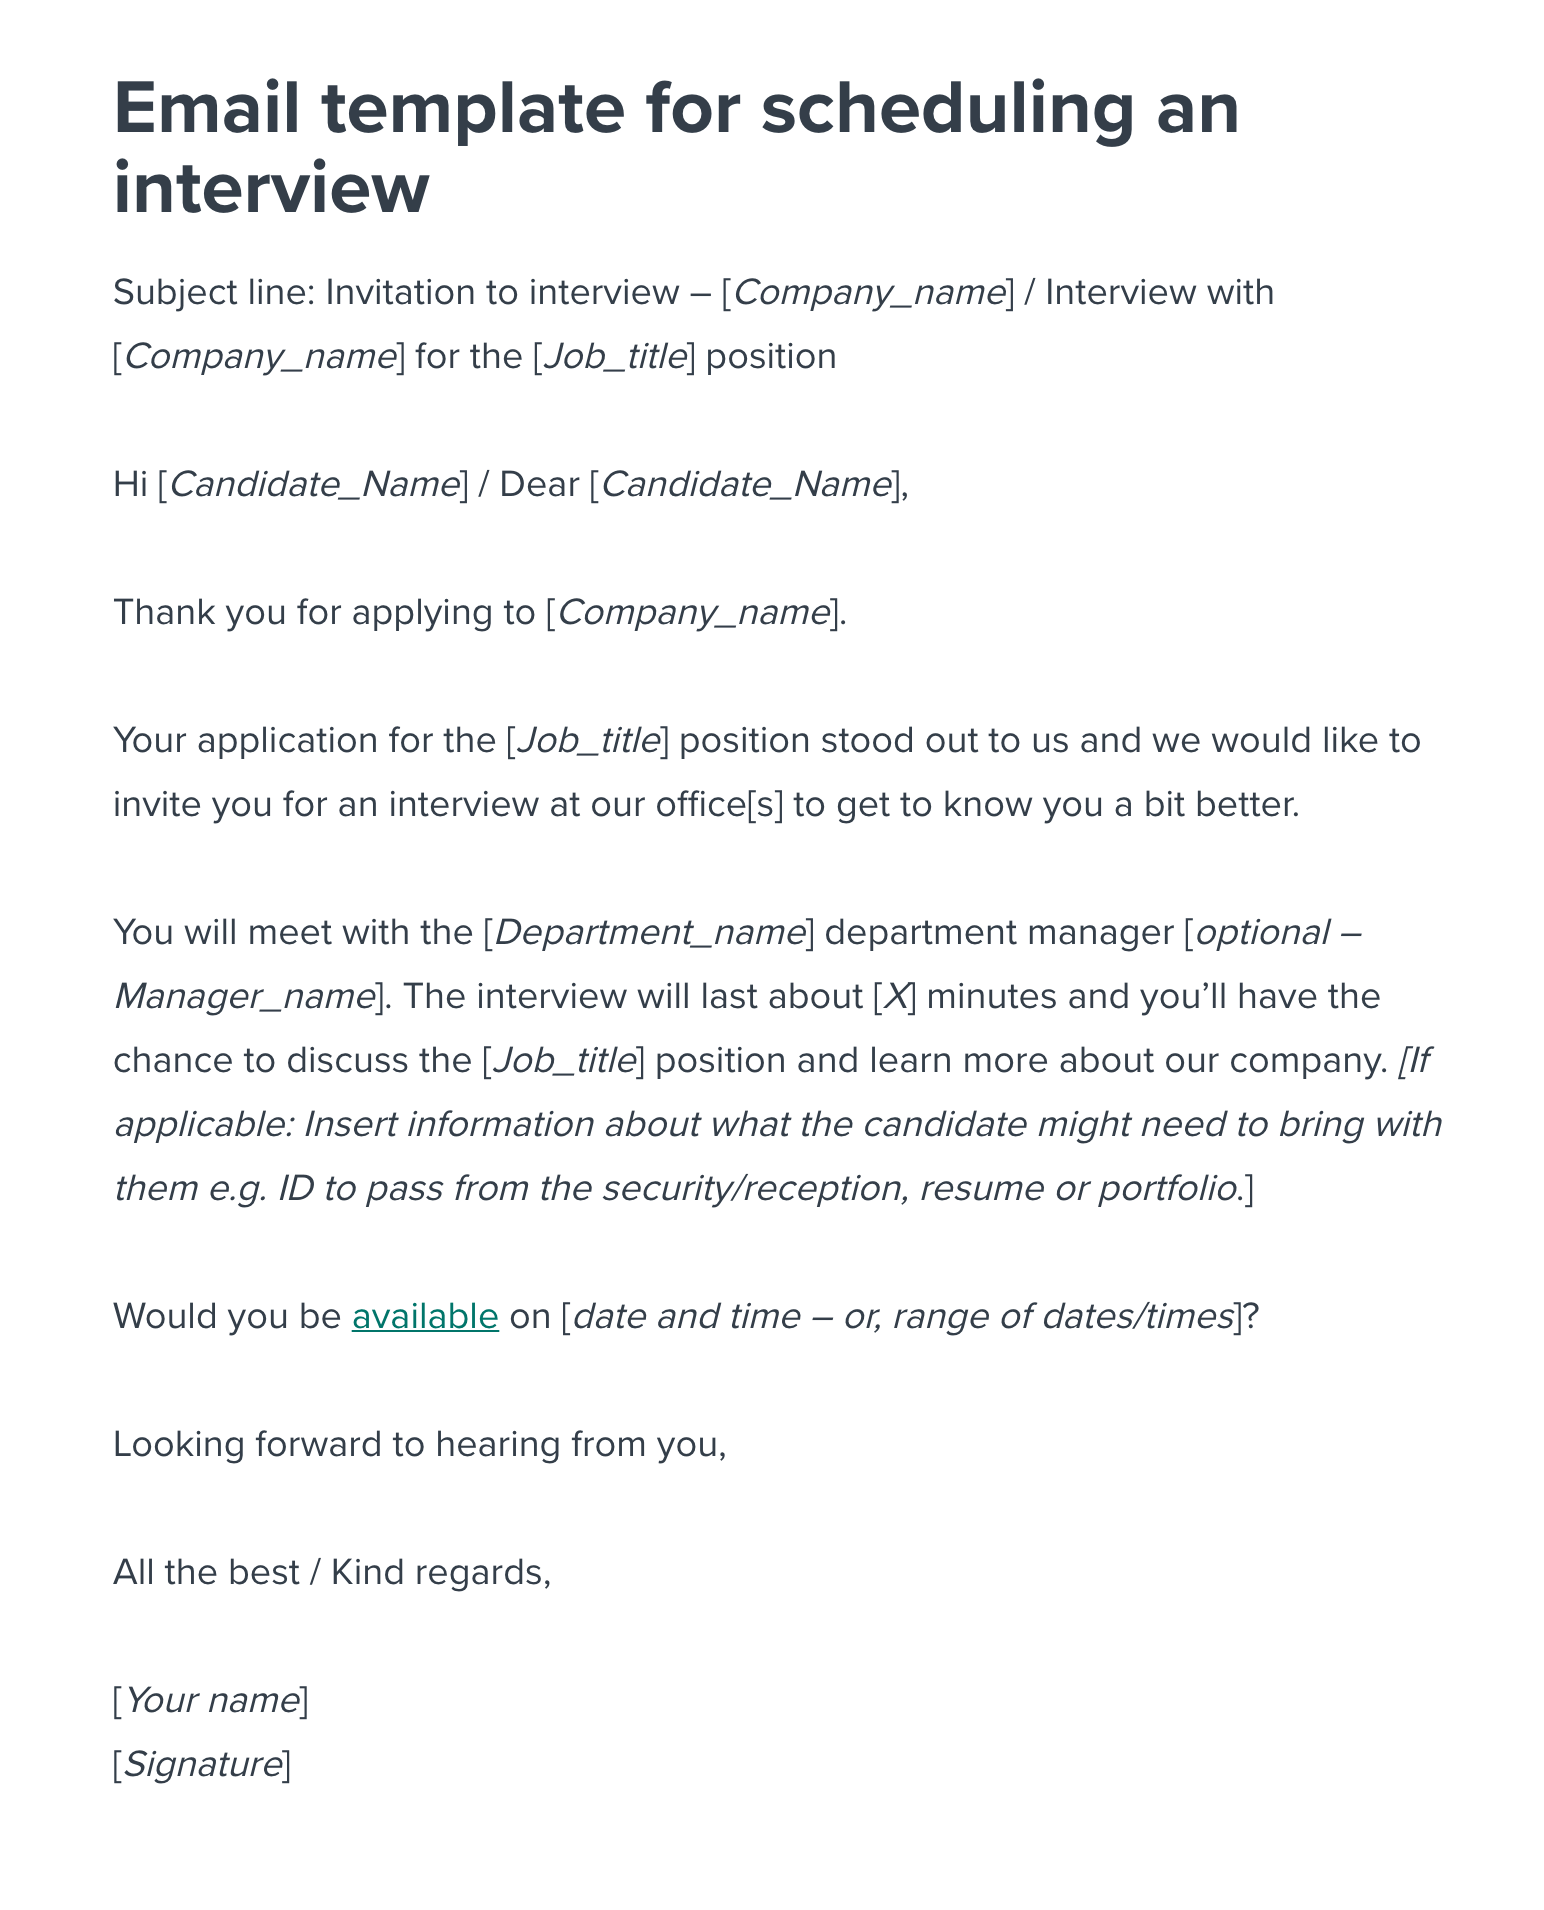 Scheduling an Interview Email Template  Workable Inside Thank You For Meeting Email Template